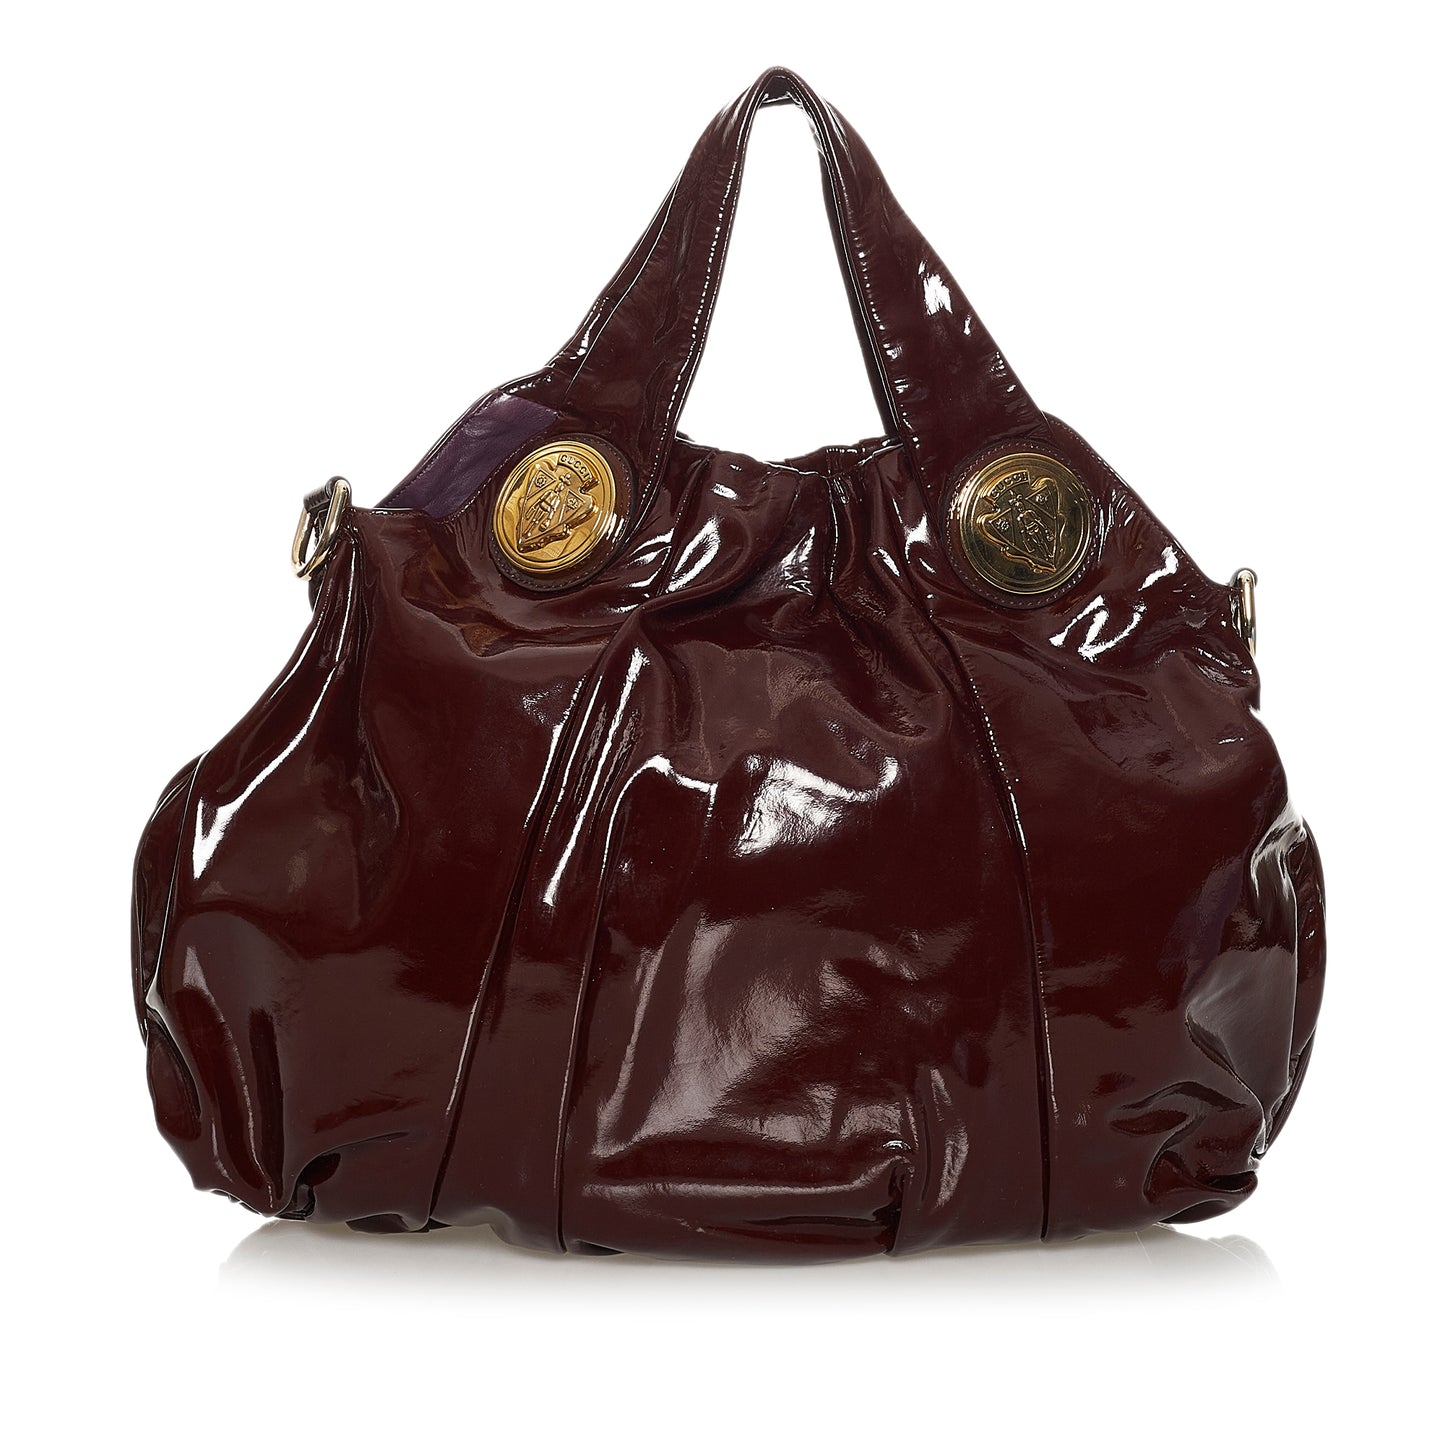 Hysteria Patent Leather Tote Bag